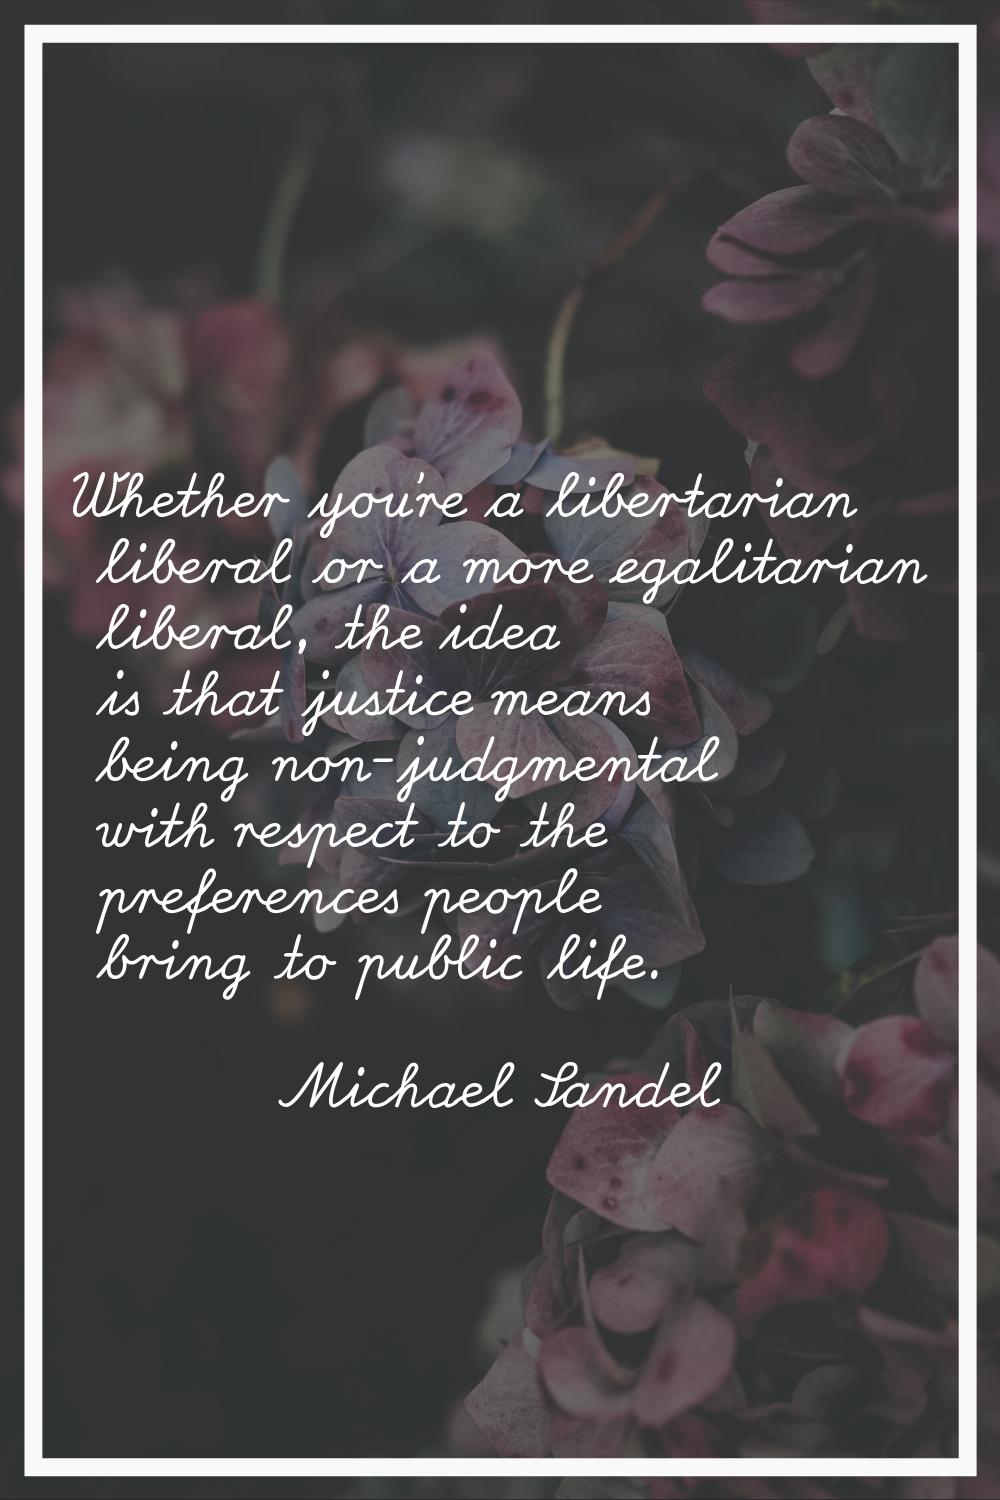 Whether you're a libertarian liberal or a more egalitarian liberal, the idea is that justice means 